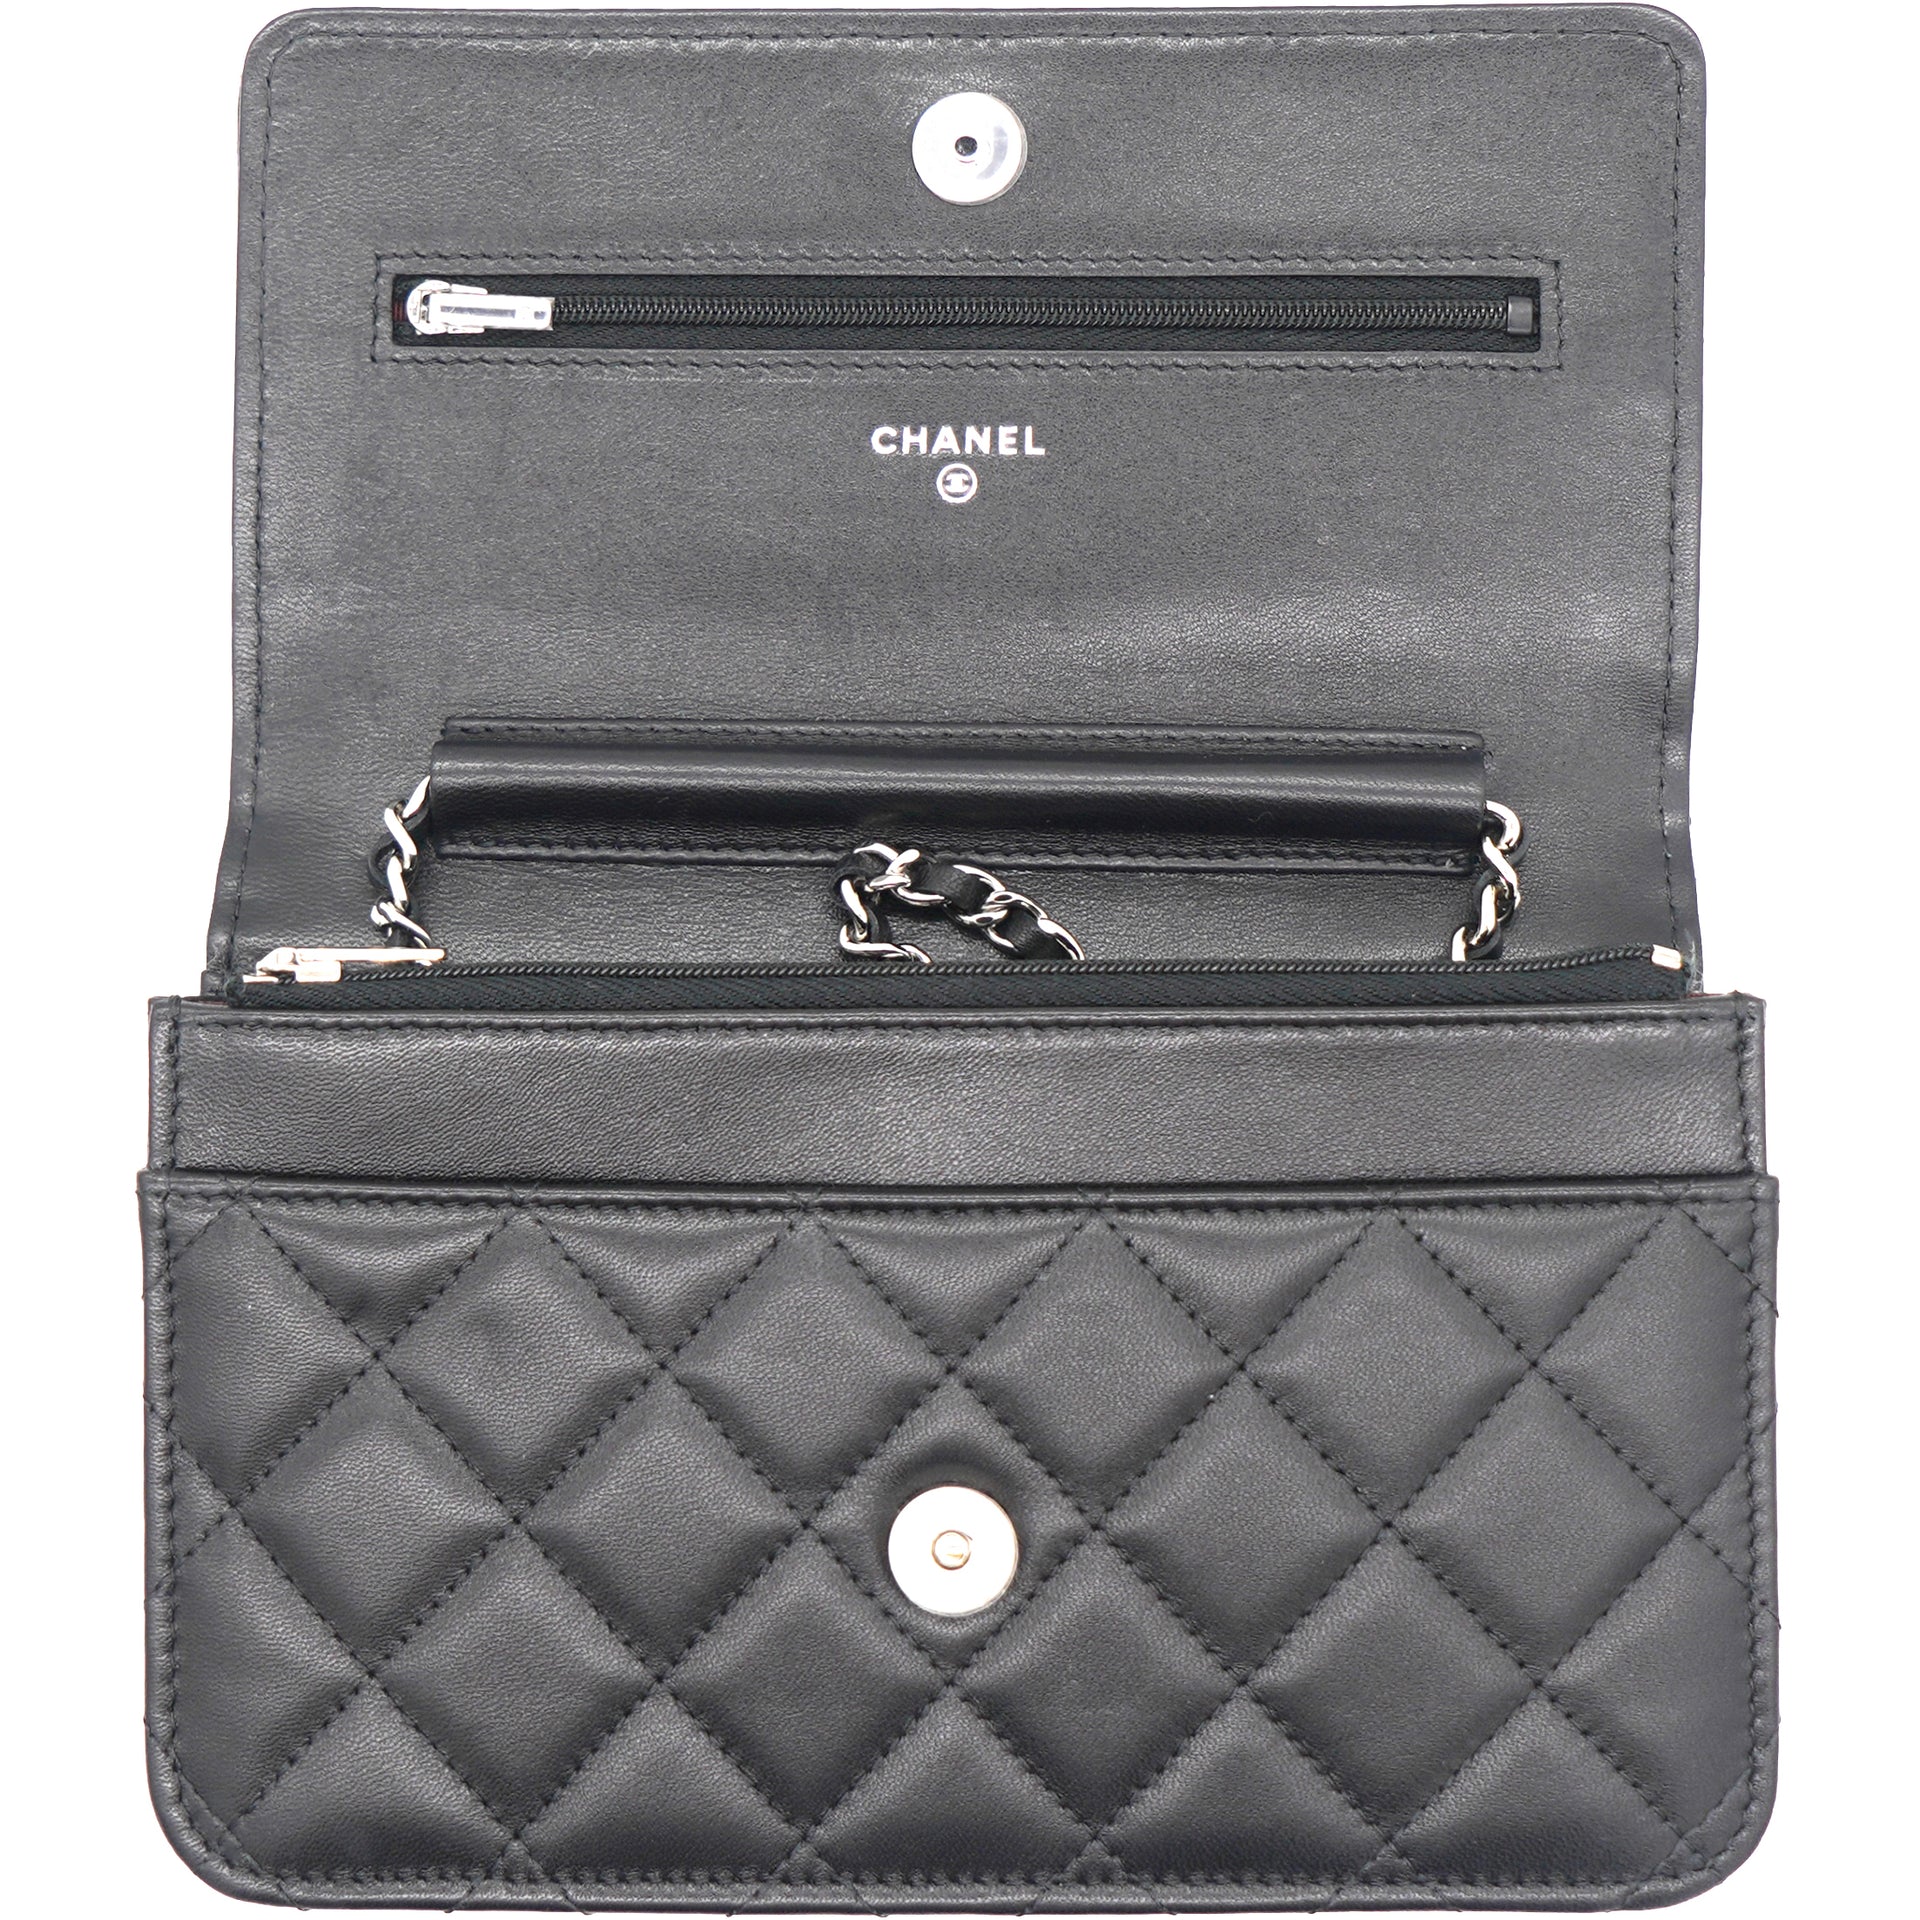 Lambskin Quilted Wallet on Chain Black